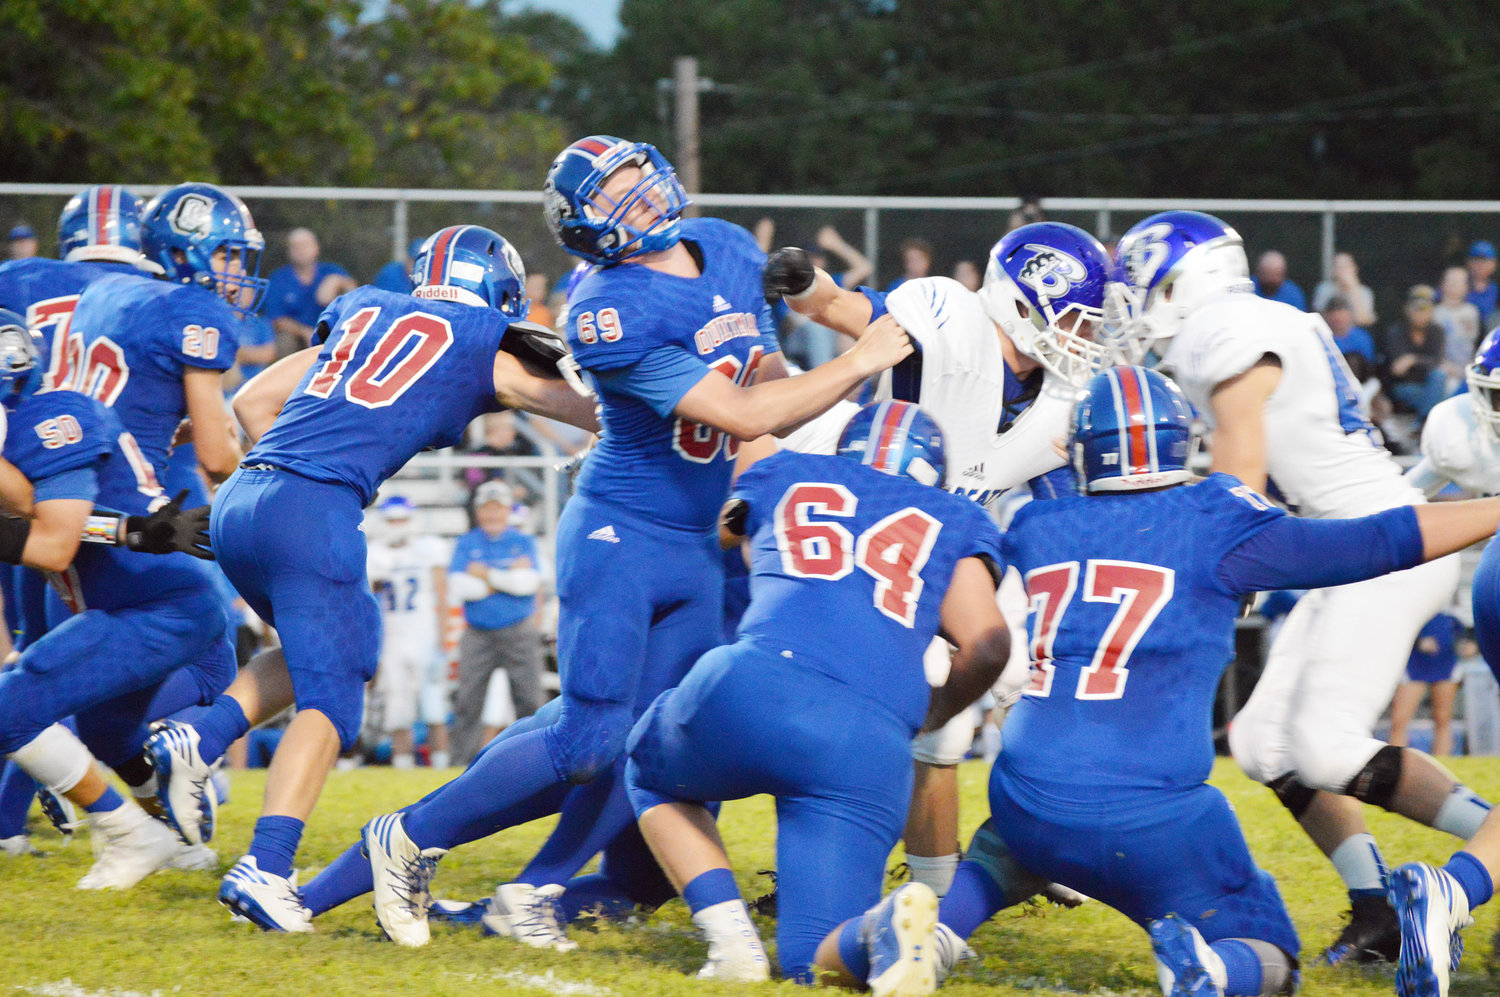 A.J. Dunn (10) finds running room behind the efforts of linemen Aaron McDade (69), Sebastain Howell (64), and Gage Tolle (77) in Friday’s game against Beckville. (Monitor photo by Larry Tucker)